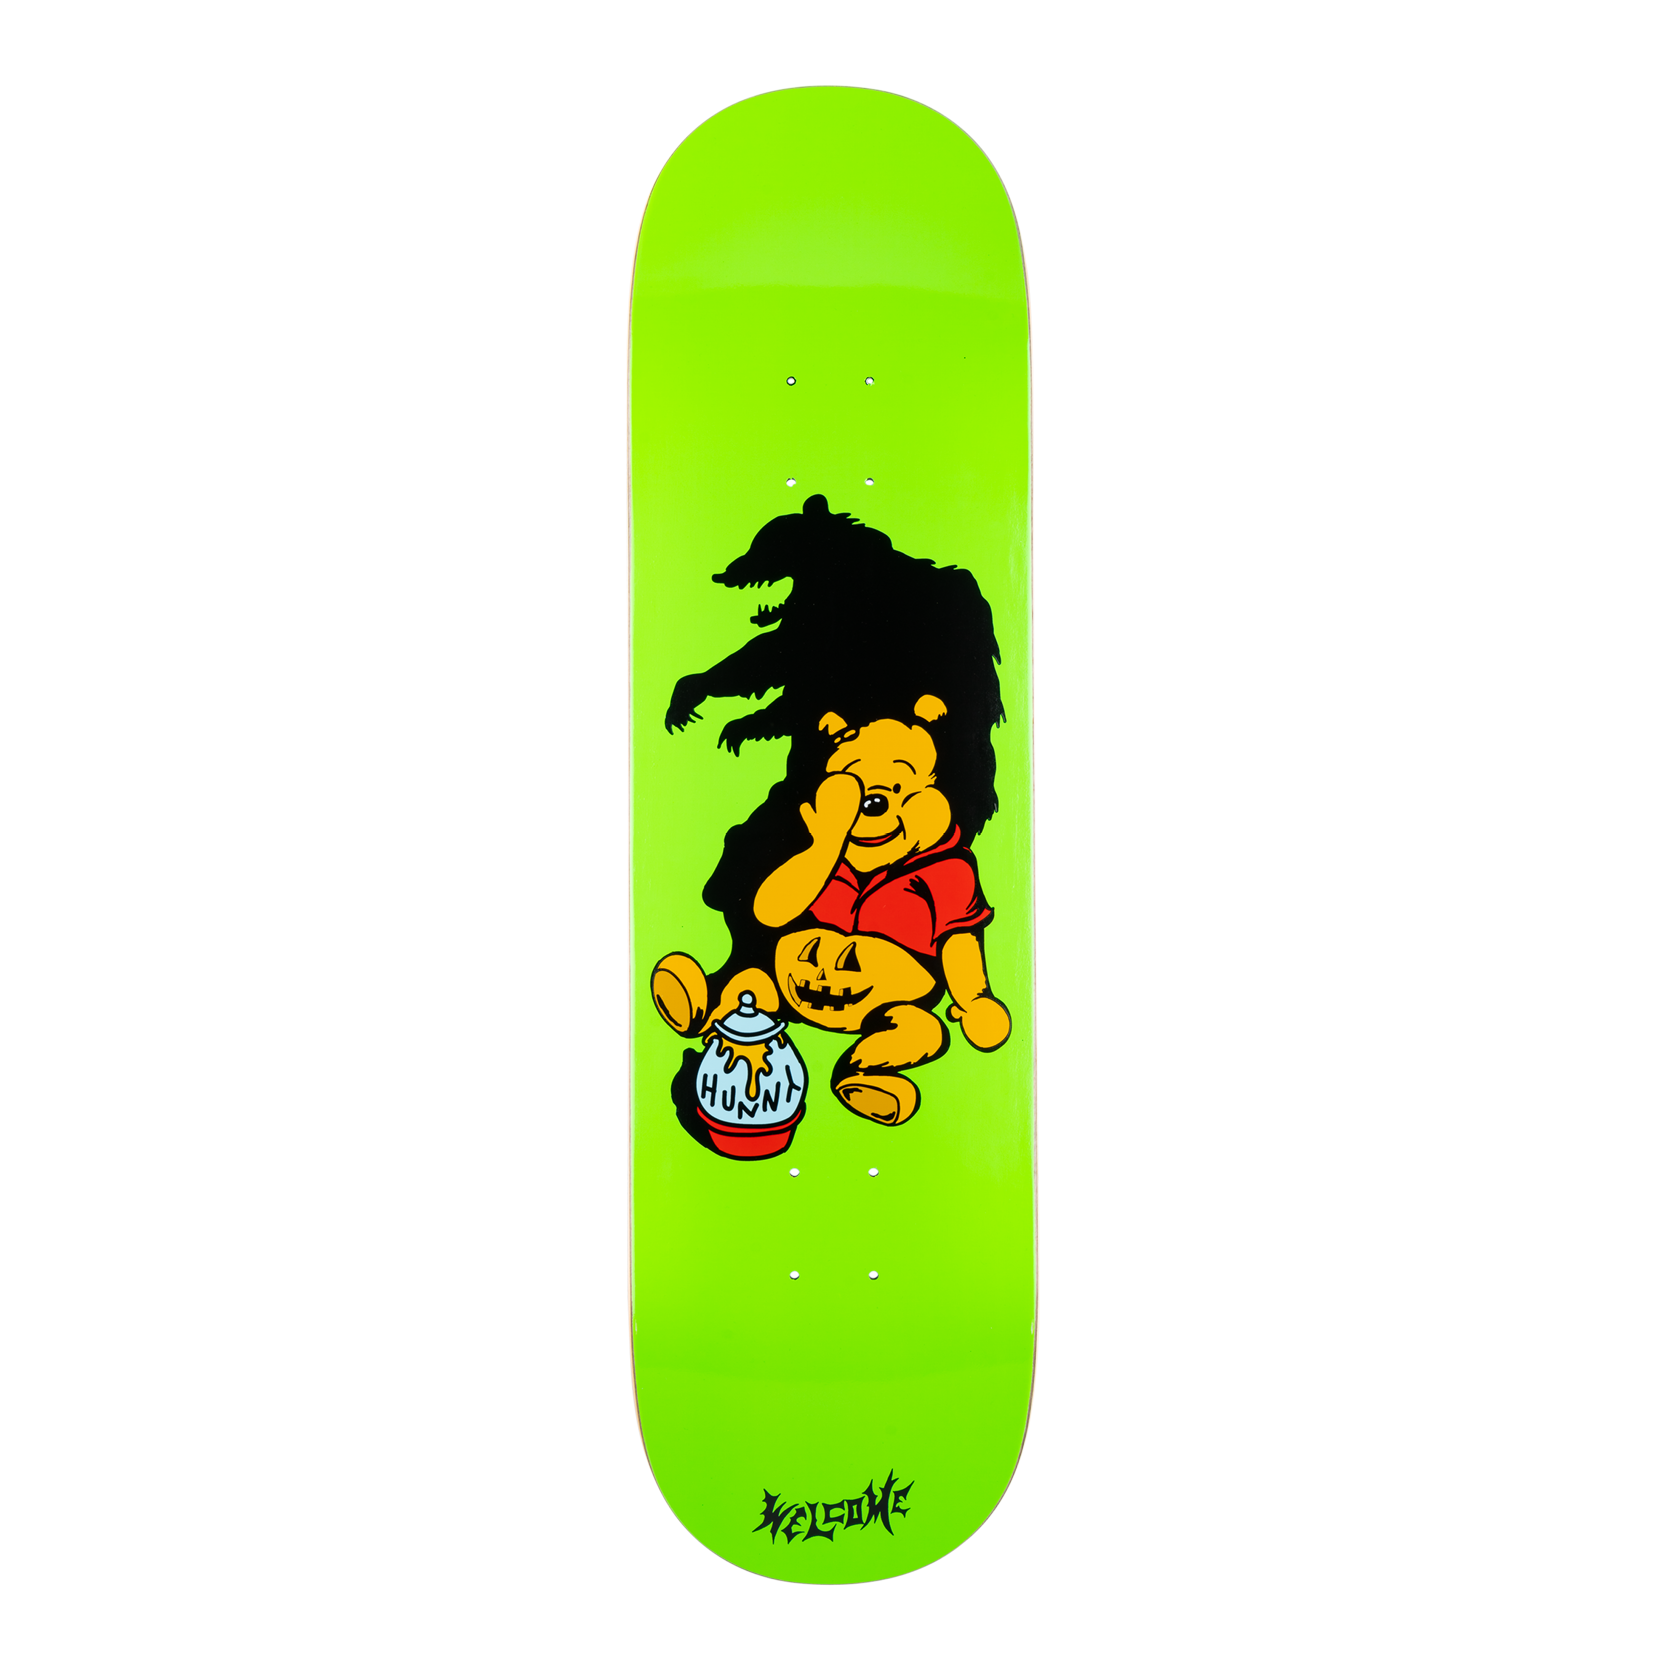 Hunny on Evil Twin 850 Welcome Skateboard Deck